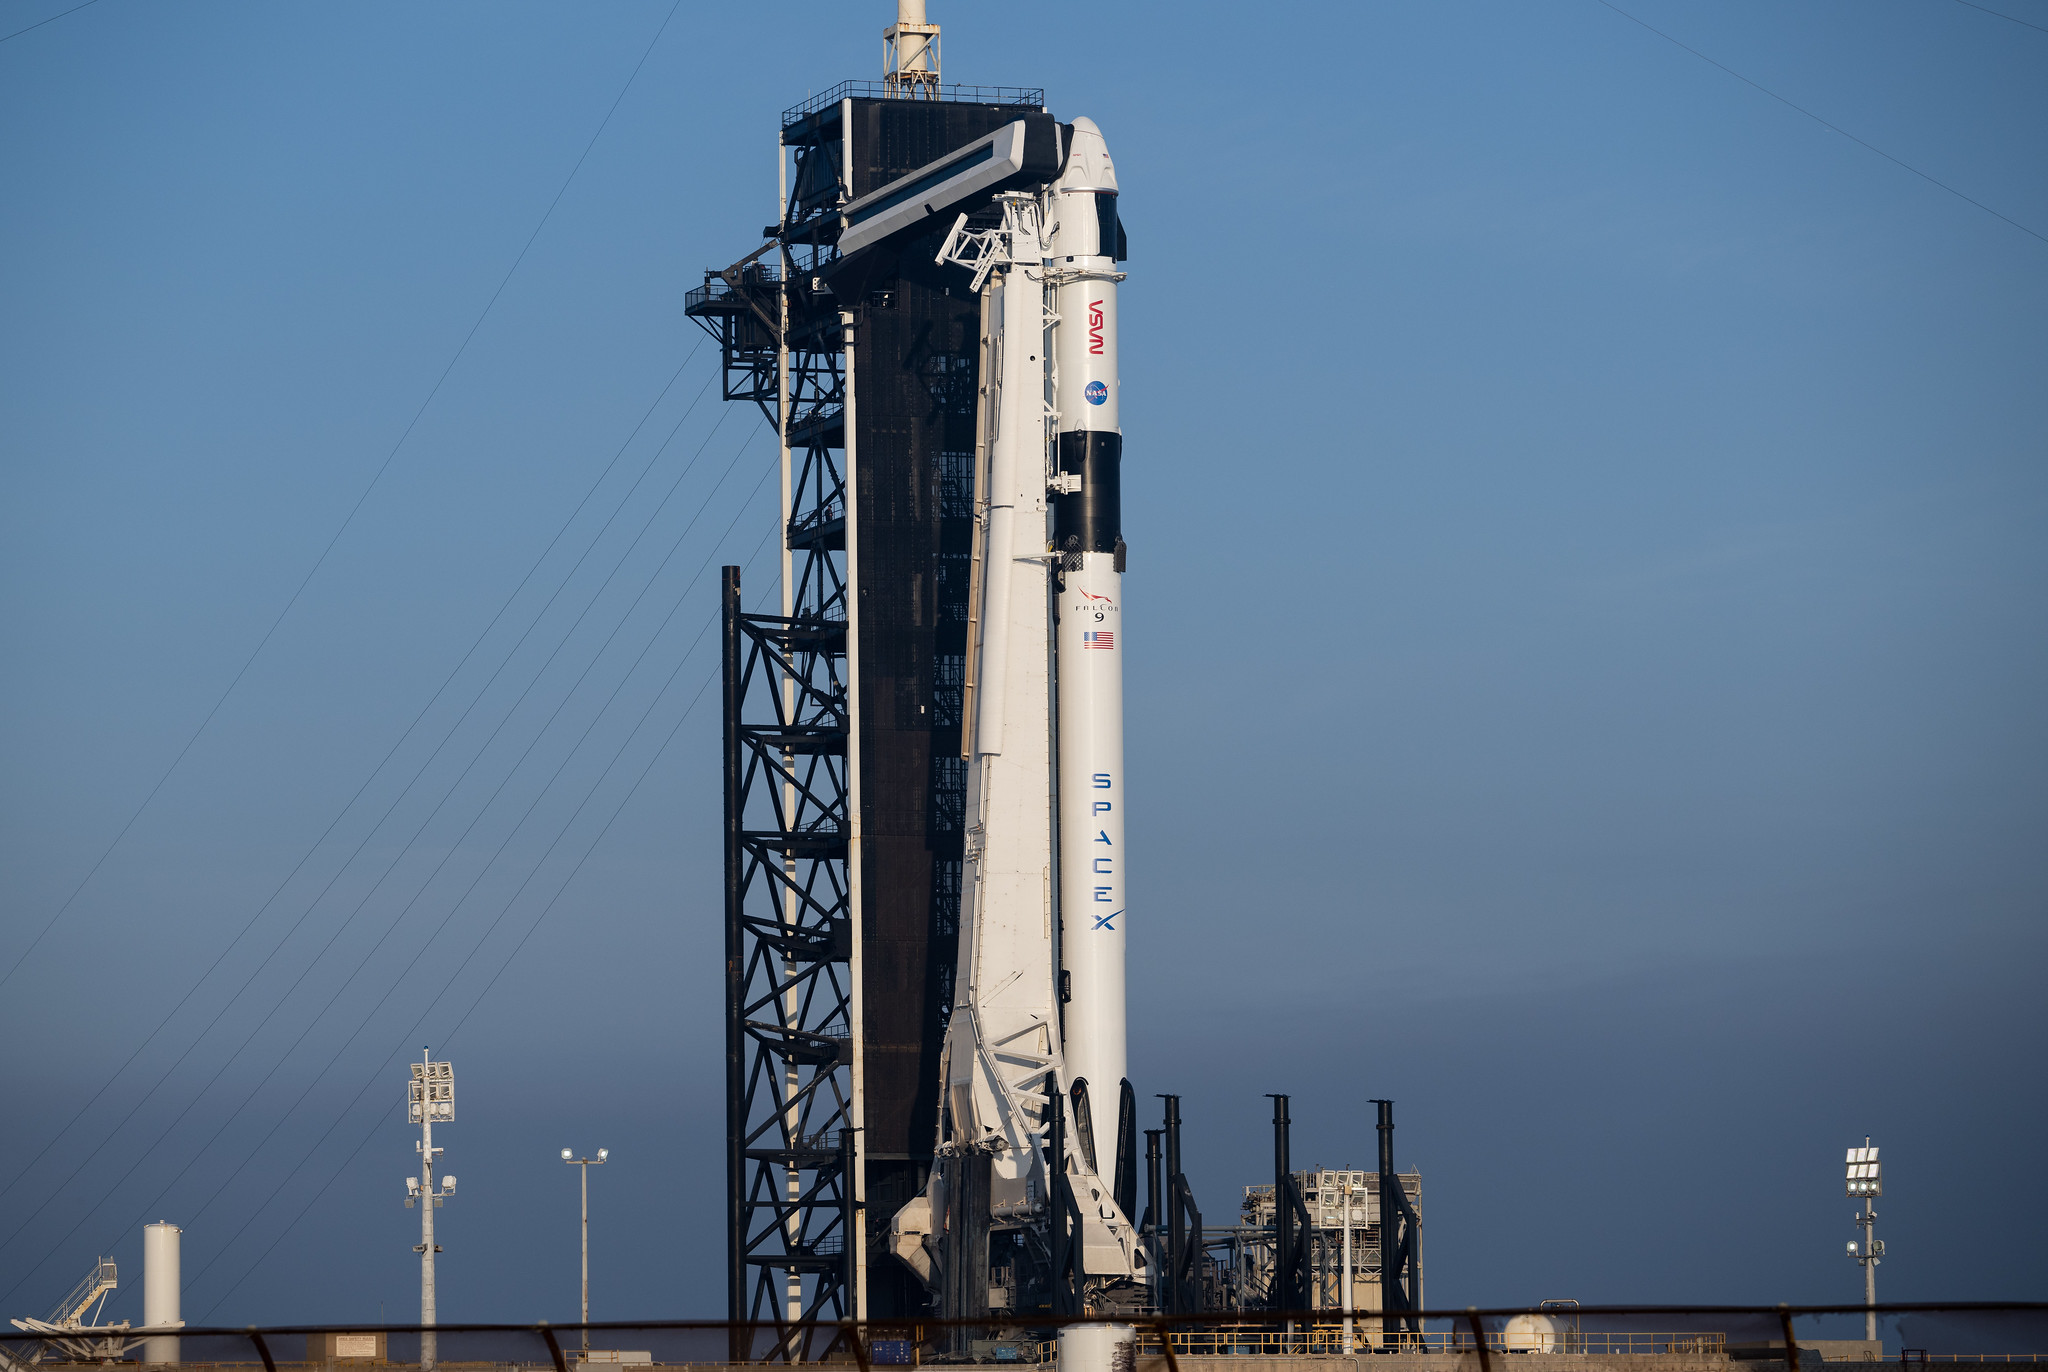 A SpaceX Falcon 9 rocket with the company's Dragon spacecraft on top is seen on the launch pad